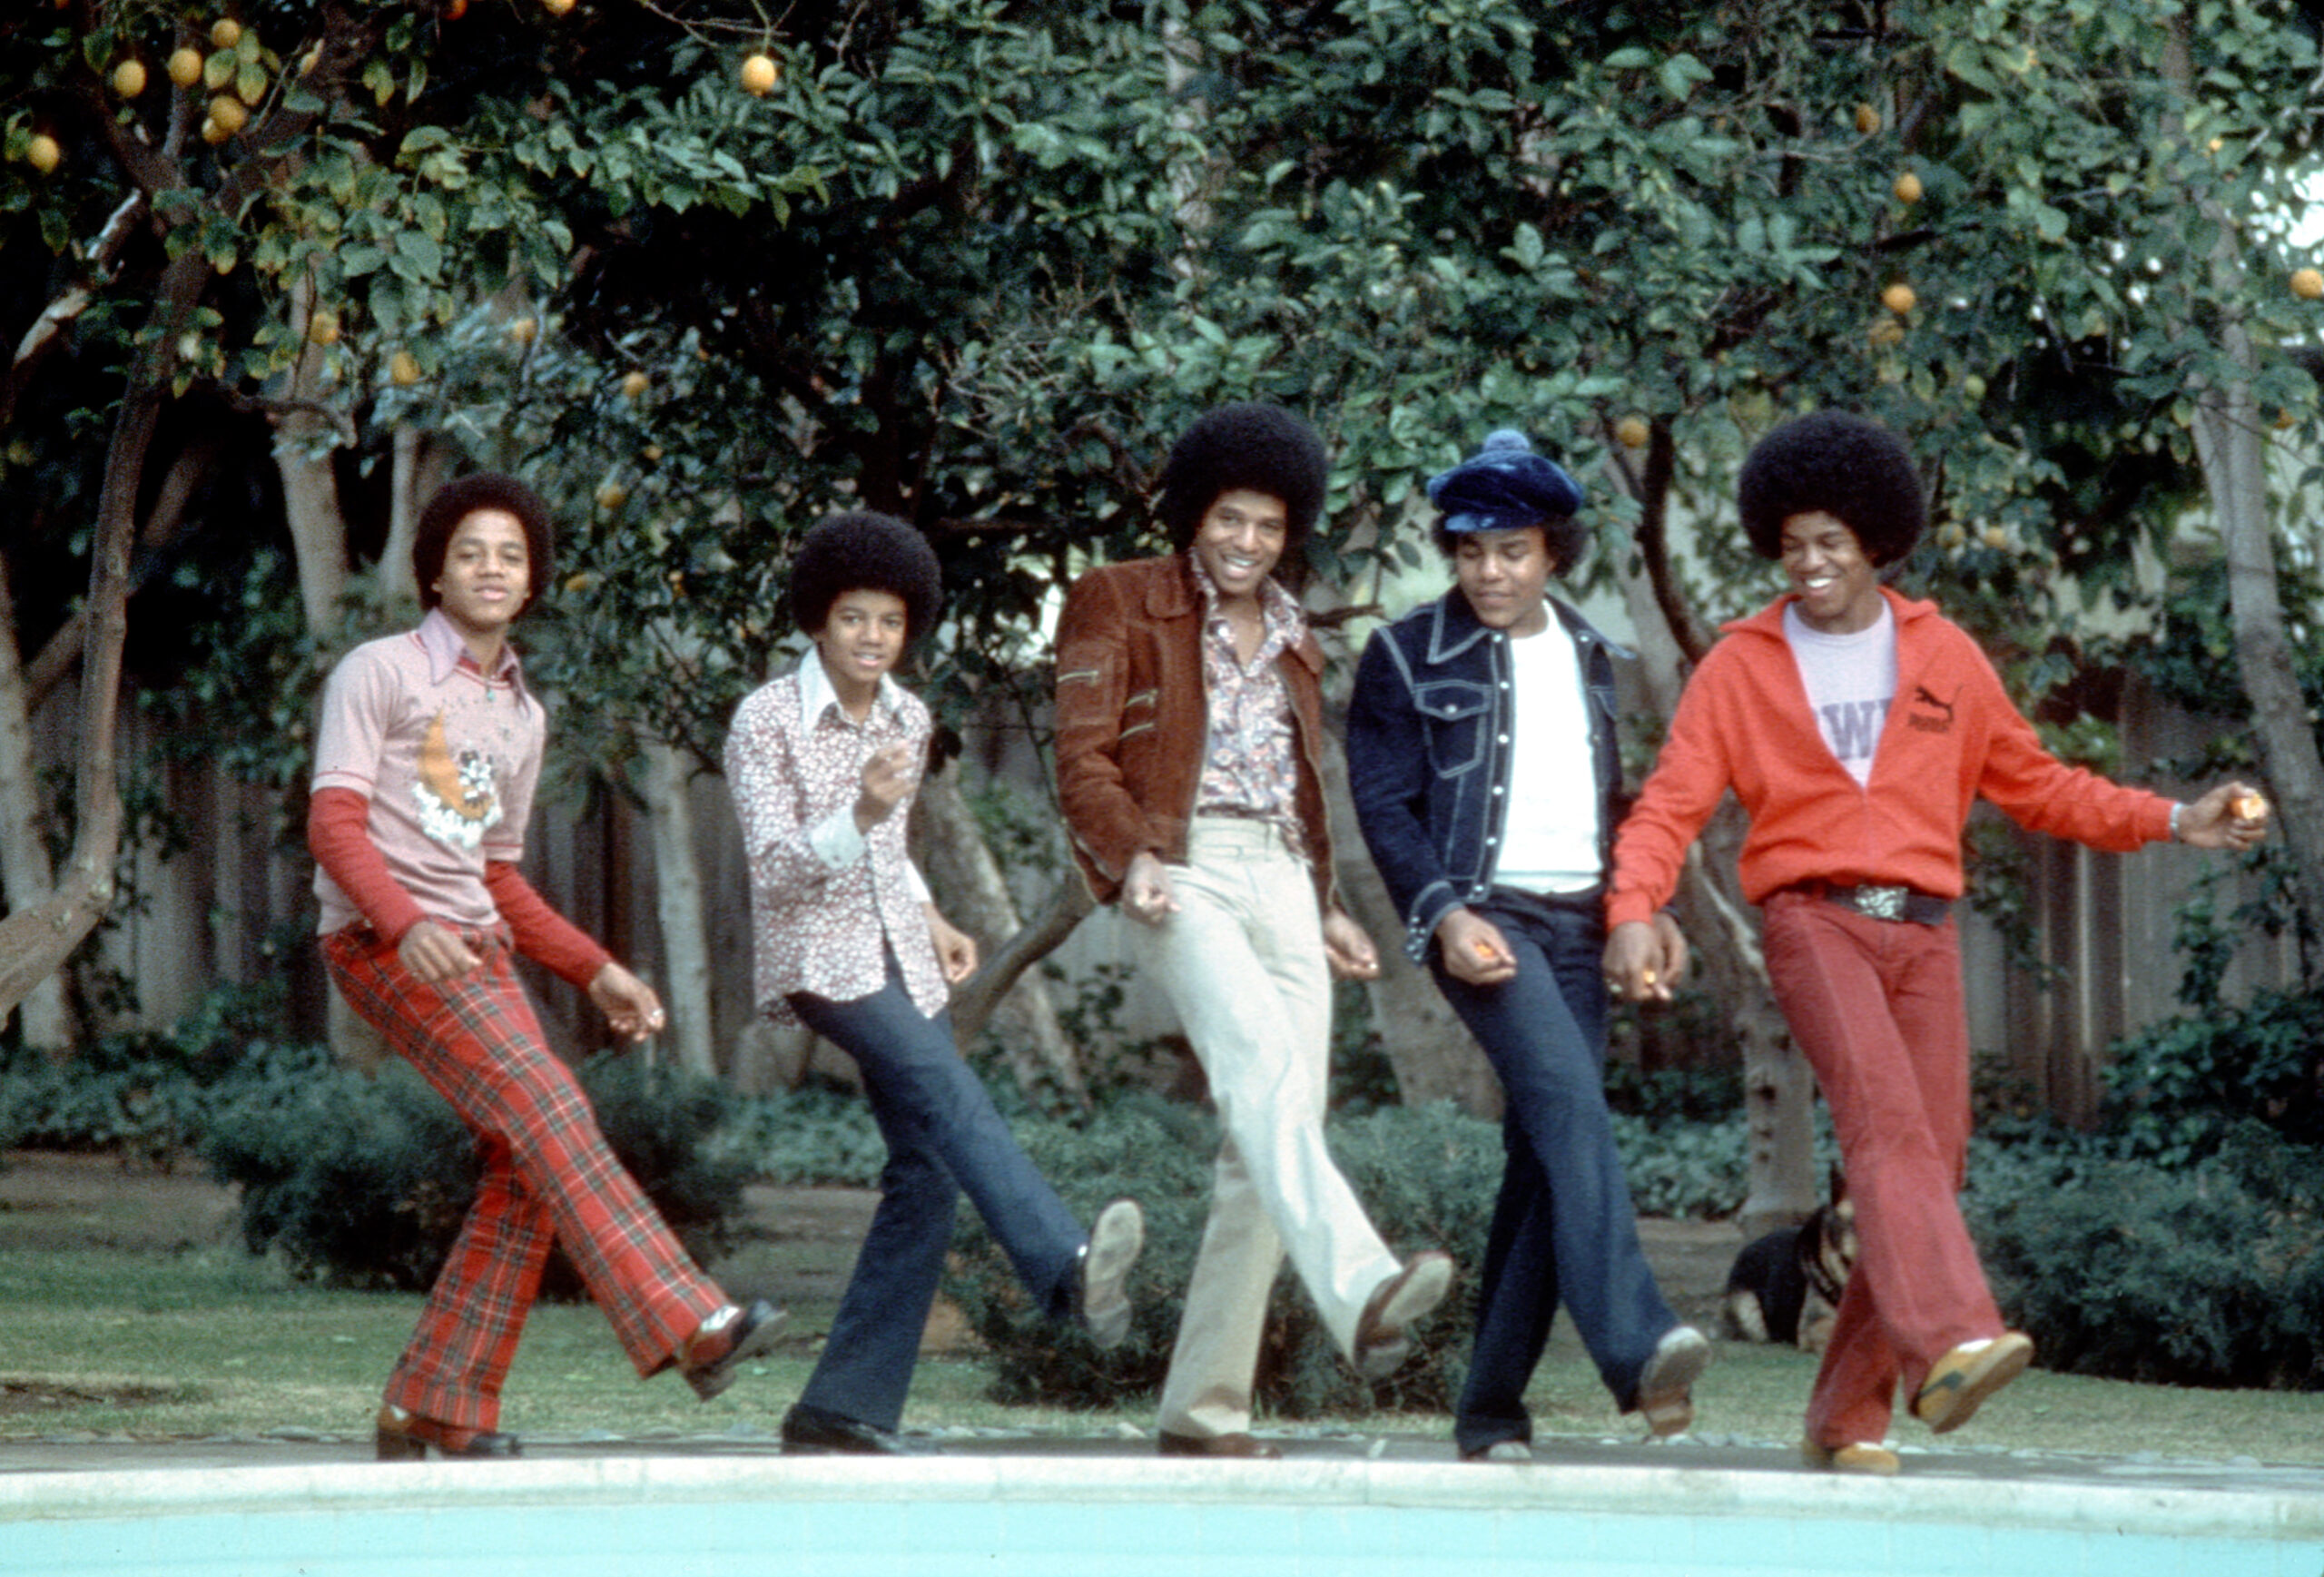 70s Bands Who Shaped Today’s Soundscape, Including P-Funk and The Jackson 5